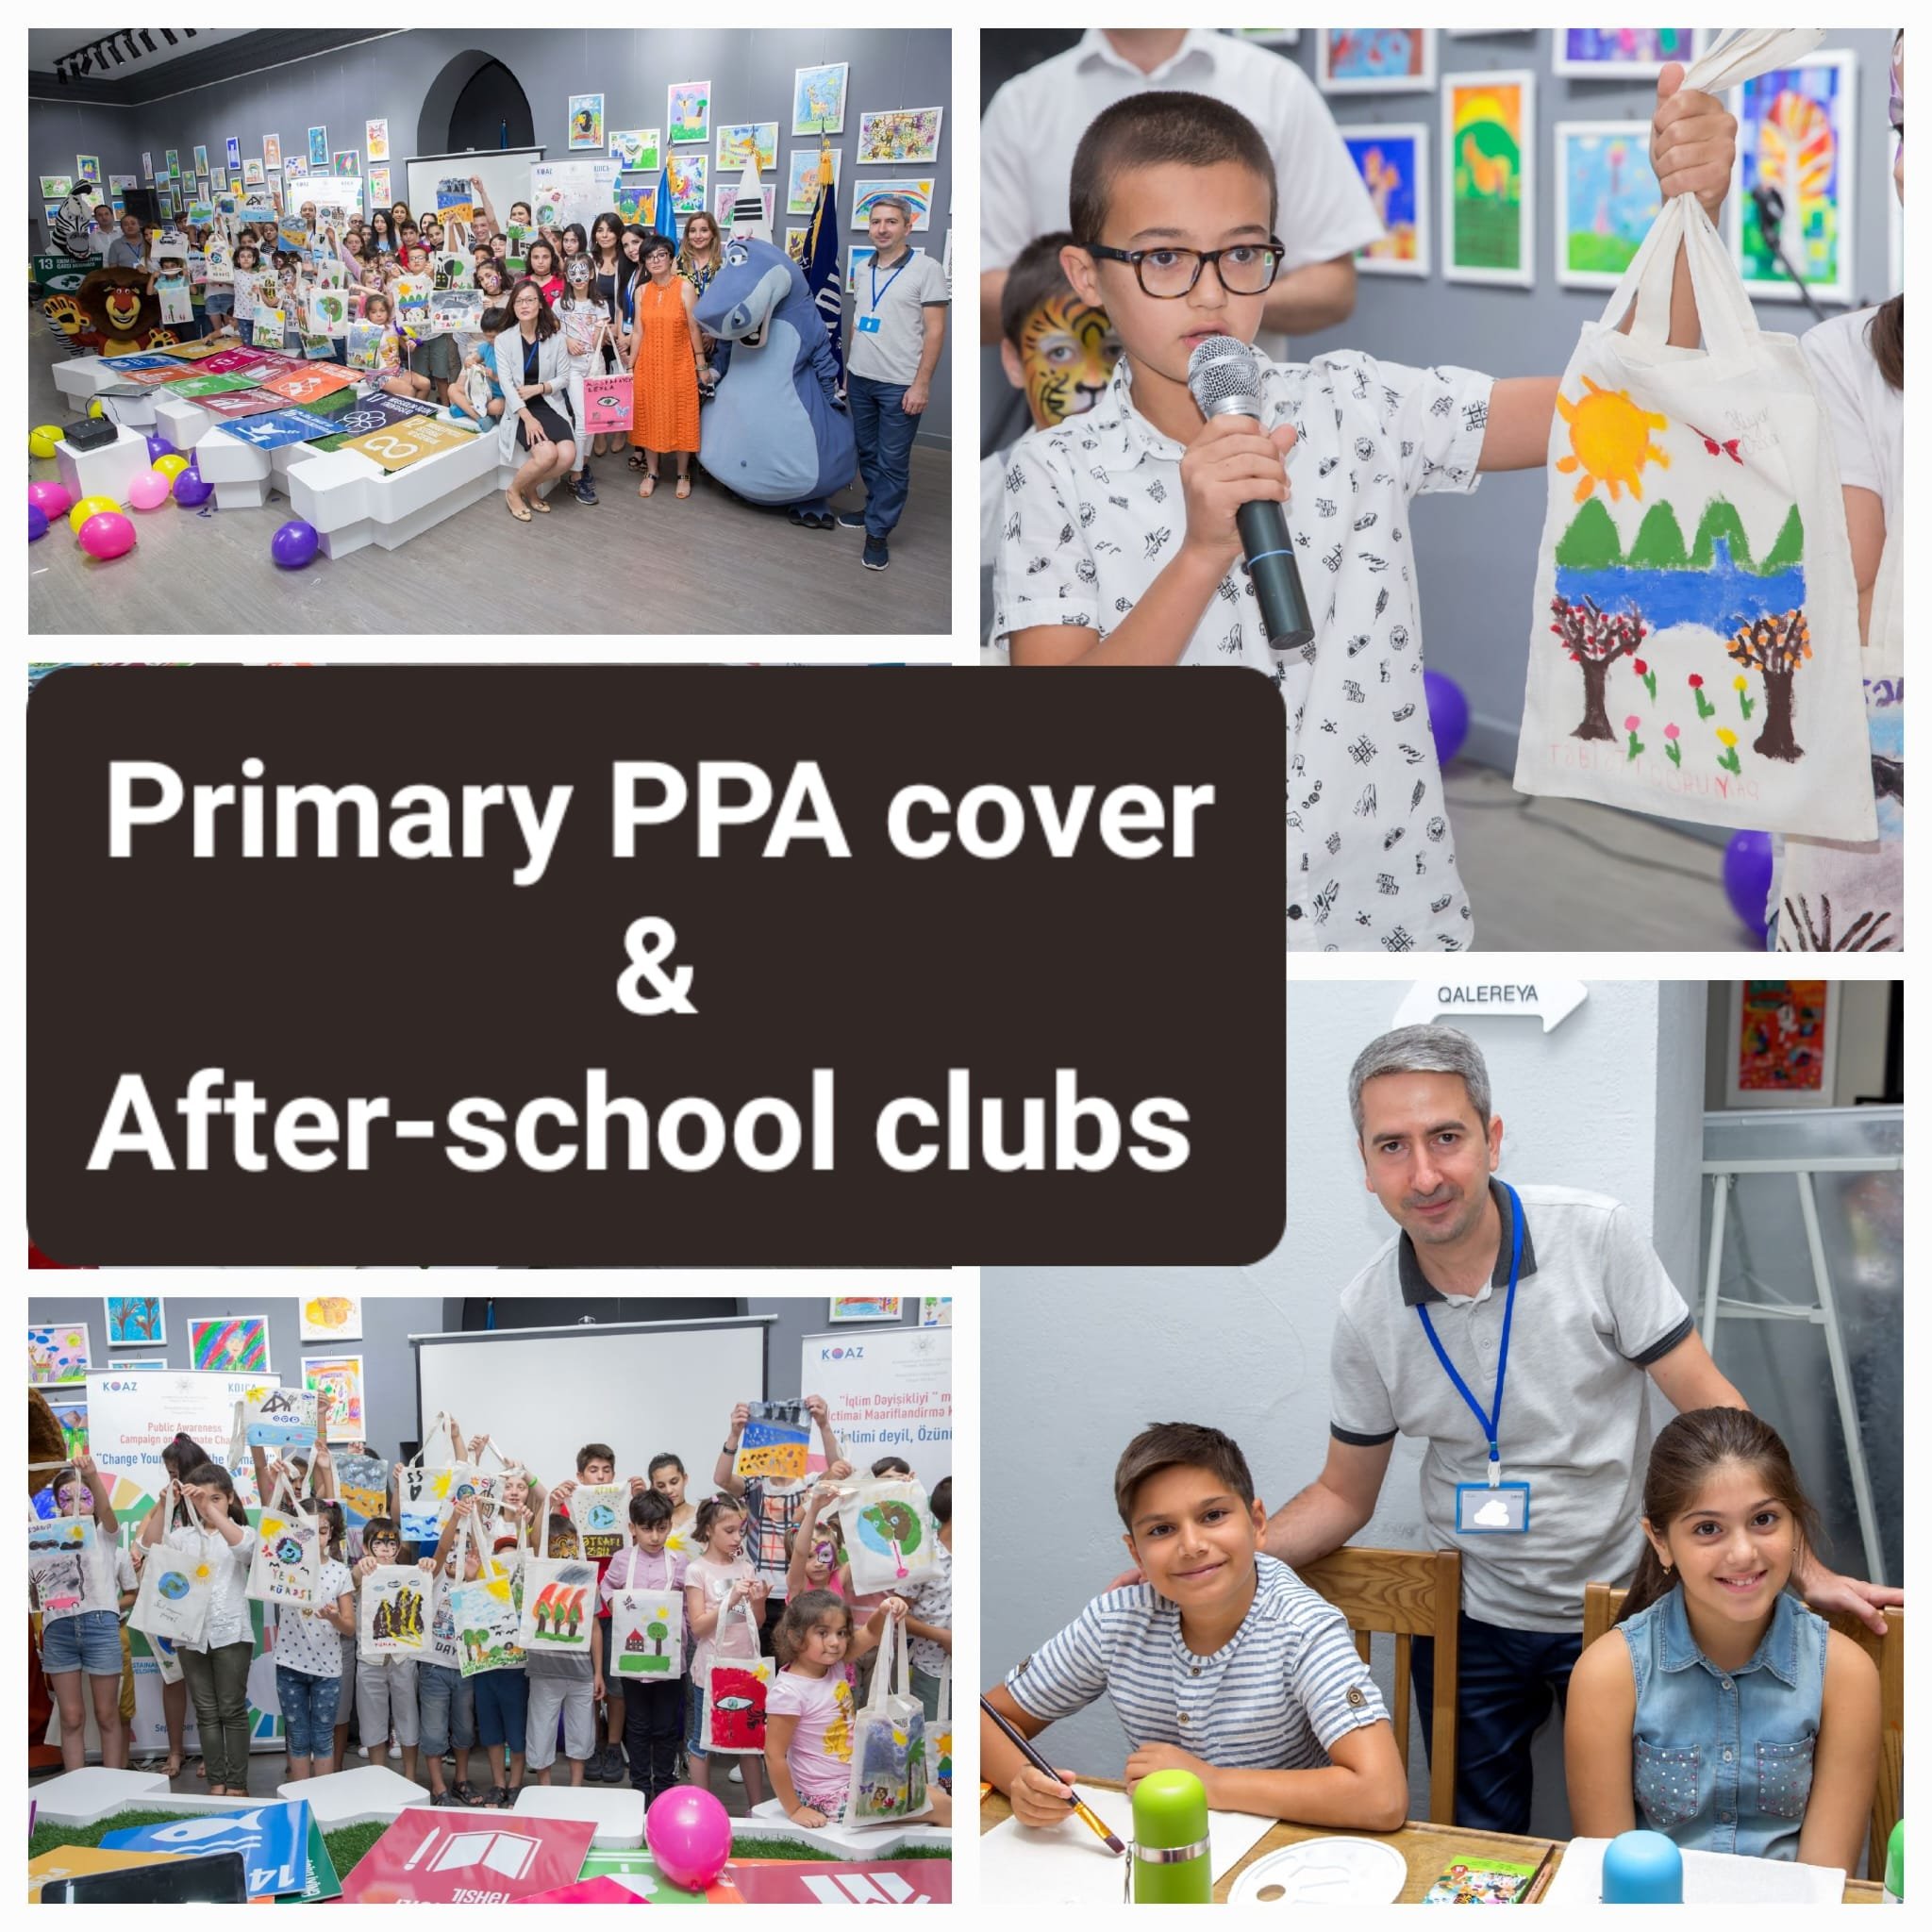 PPA Cover & After-school clubs 